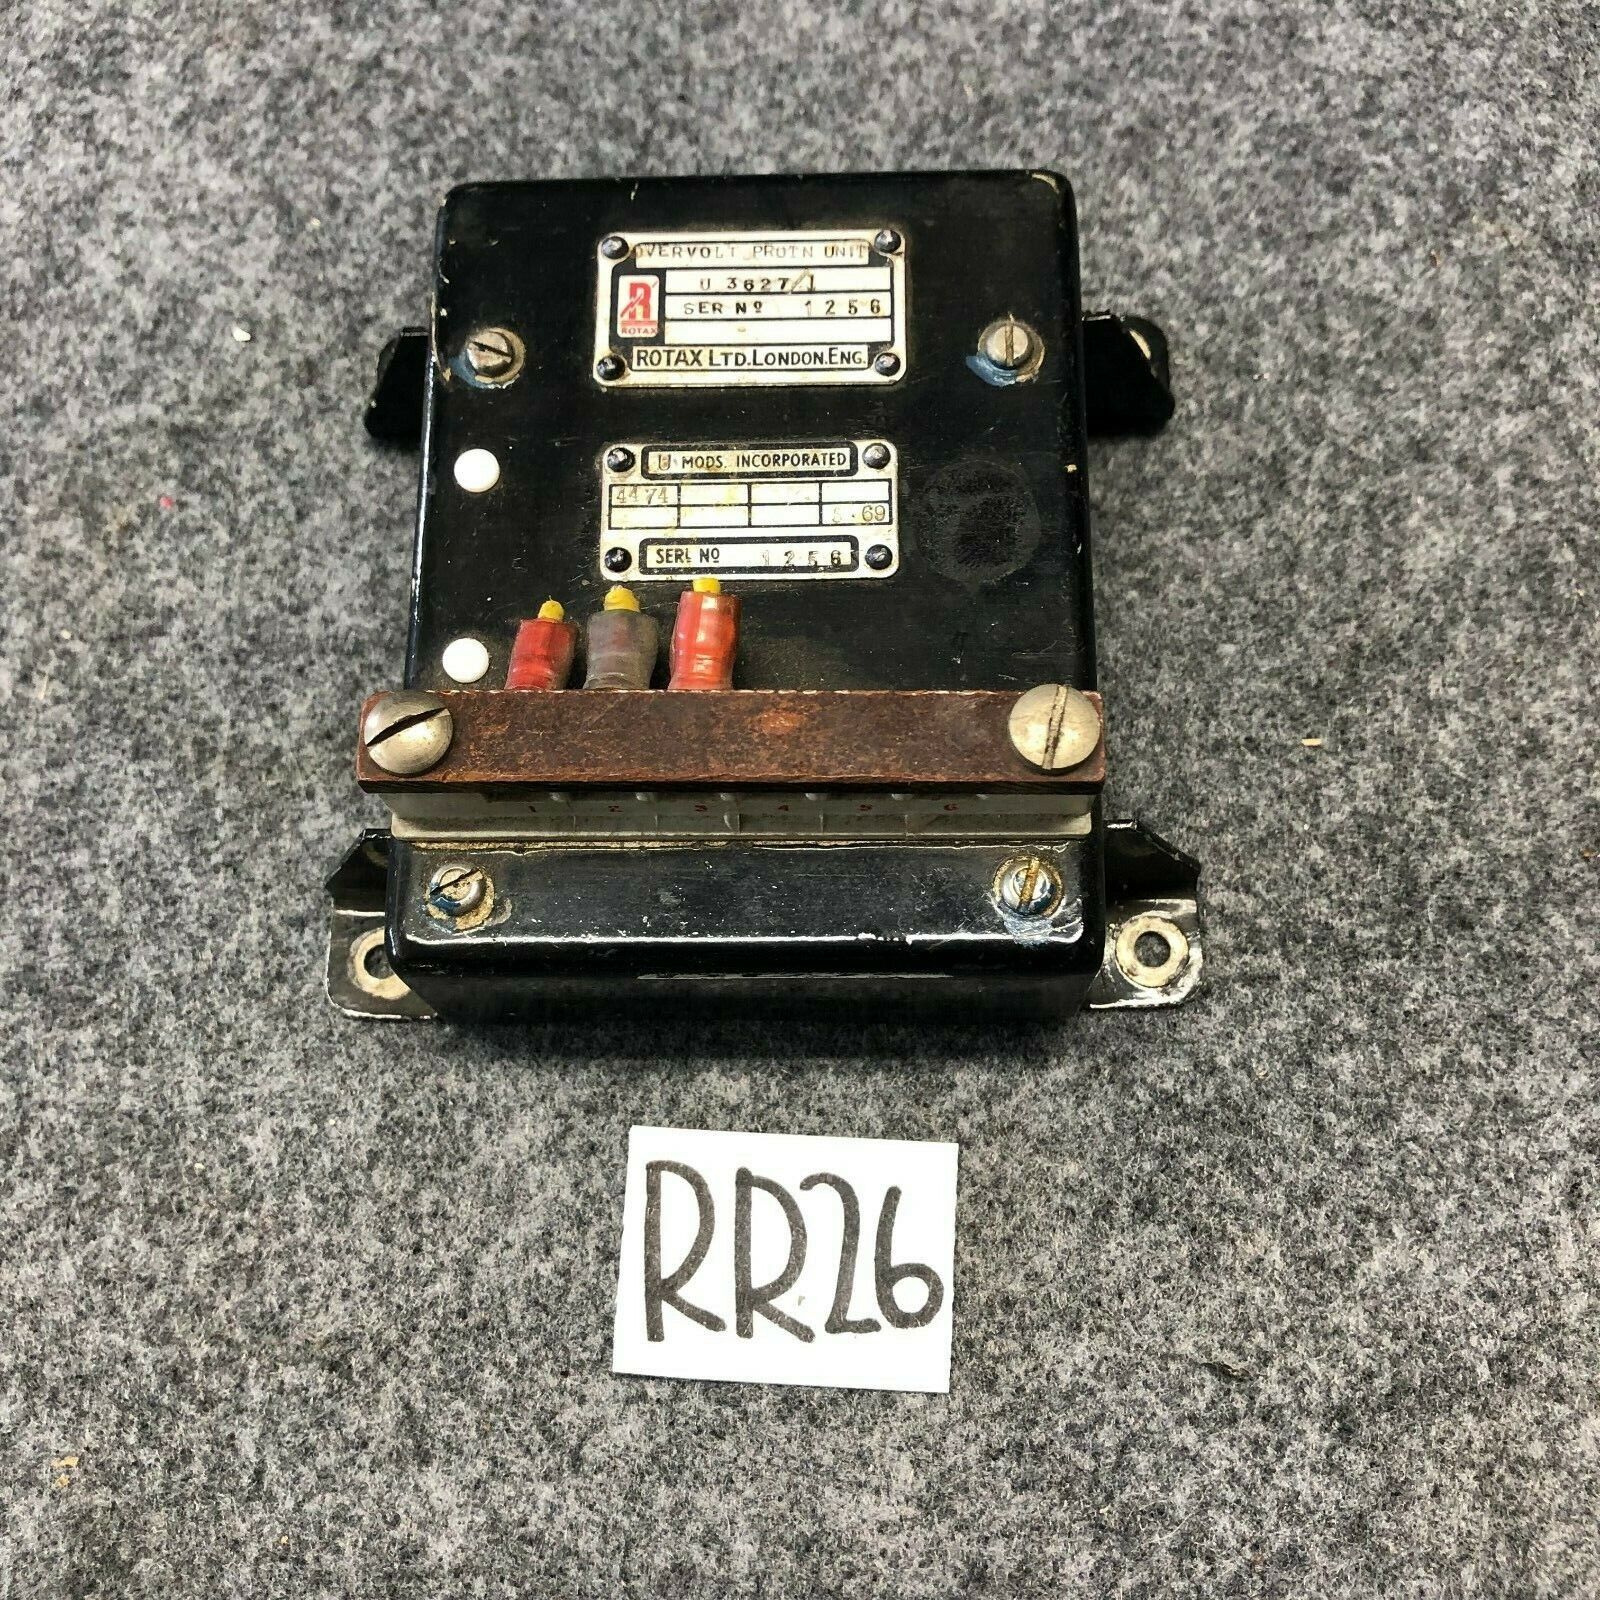 Hawker Rotax Over Voltage Protection Unit P/N U3627-1 